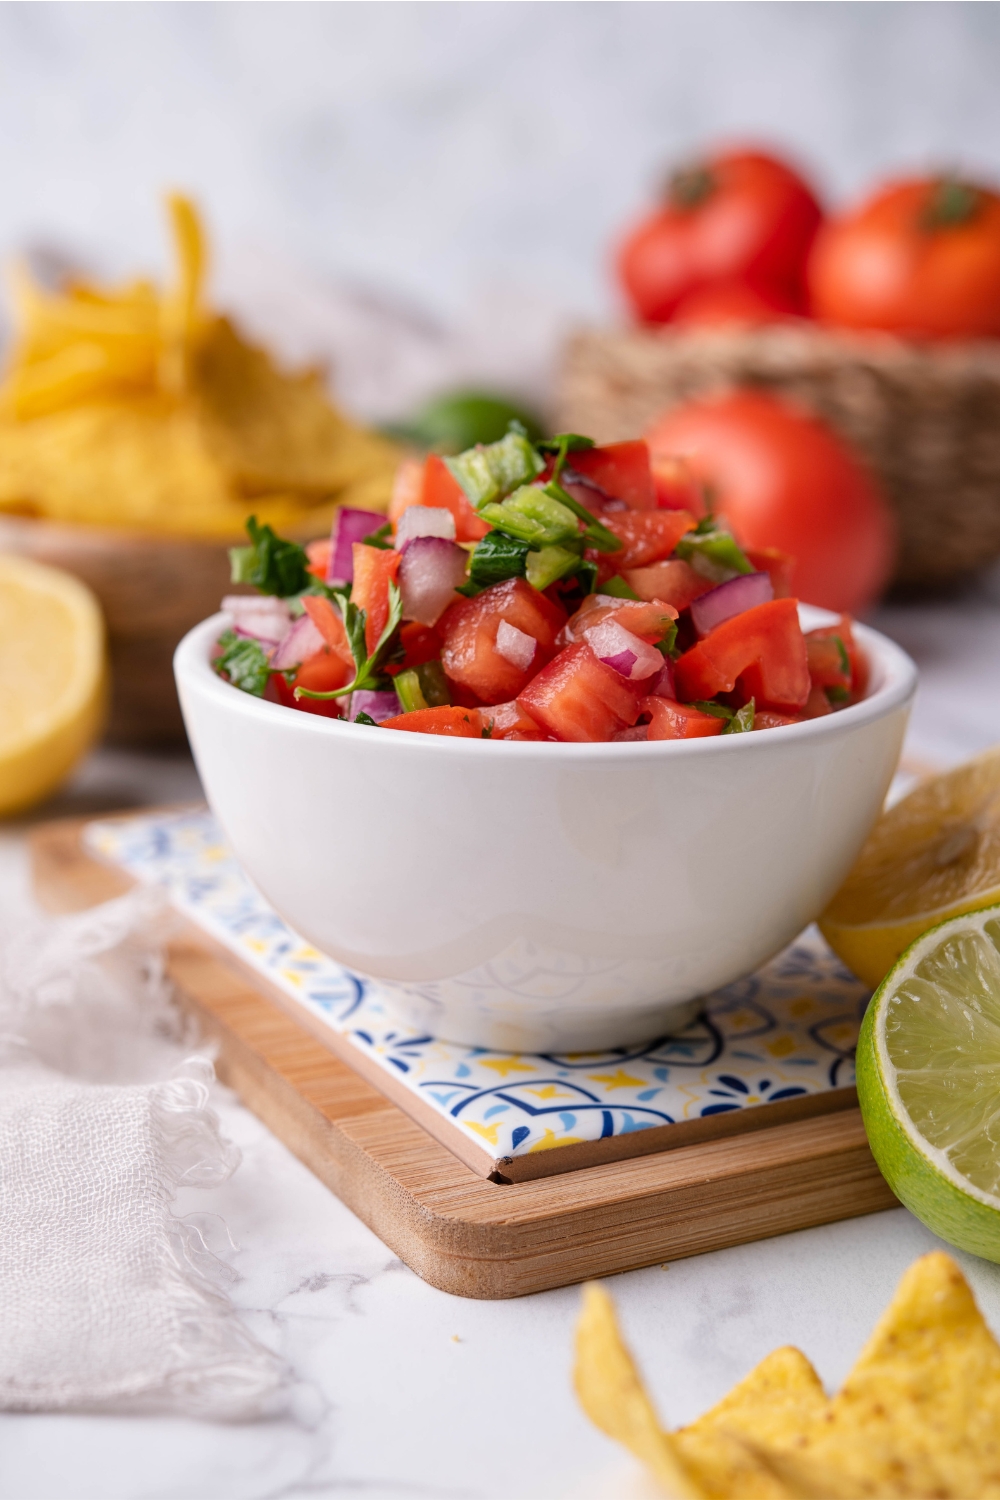 Fresh tomato salsa in a white bowl atop a decorative serving tray, surrounded by limes and lemons. There are bowls of tomatoes and tortilla chips in the background.